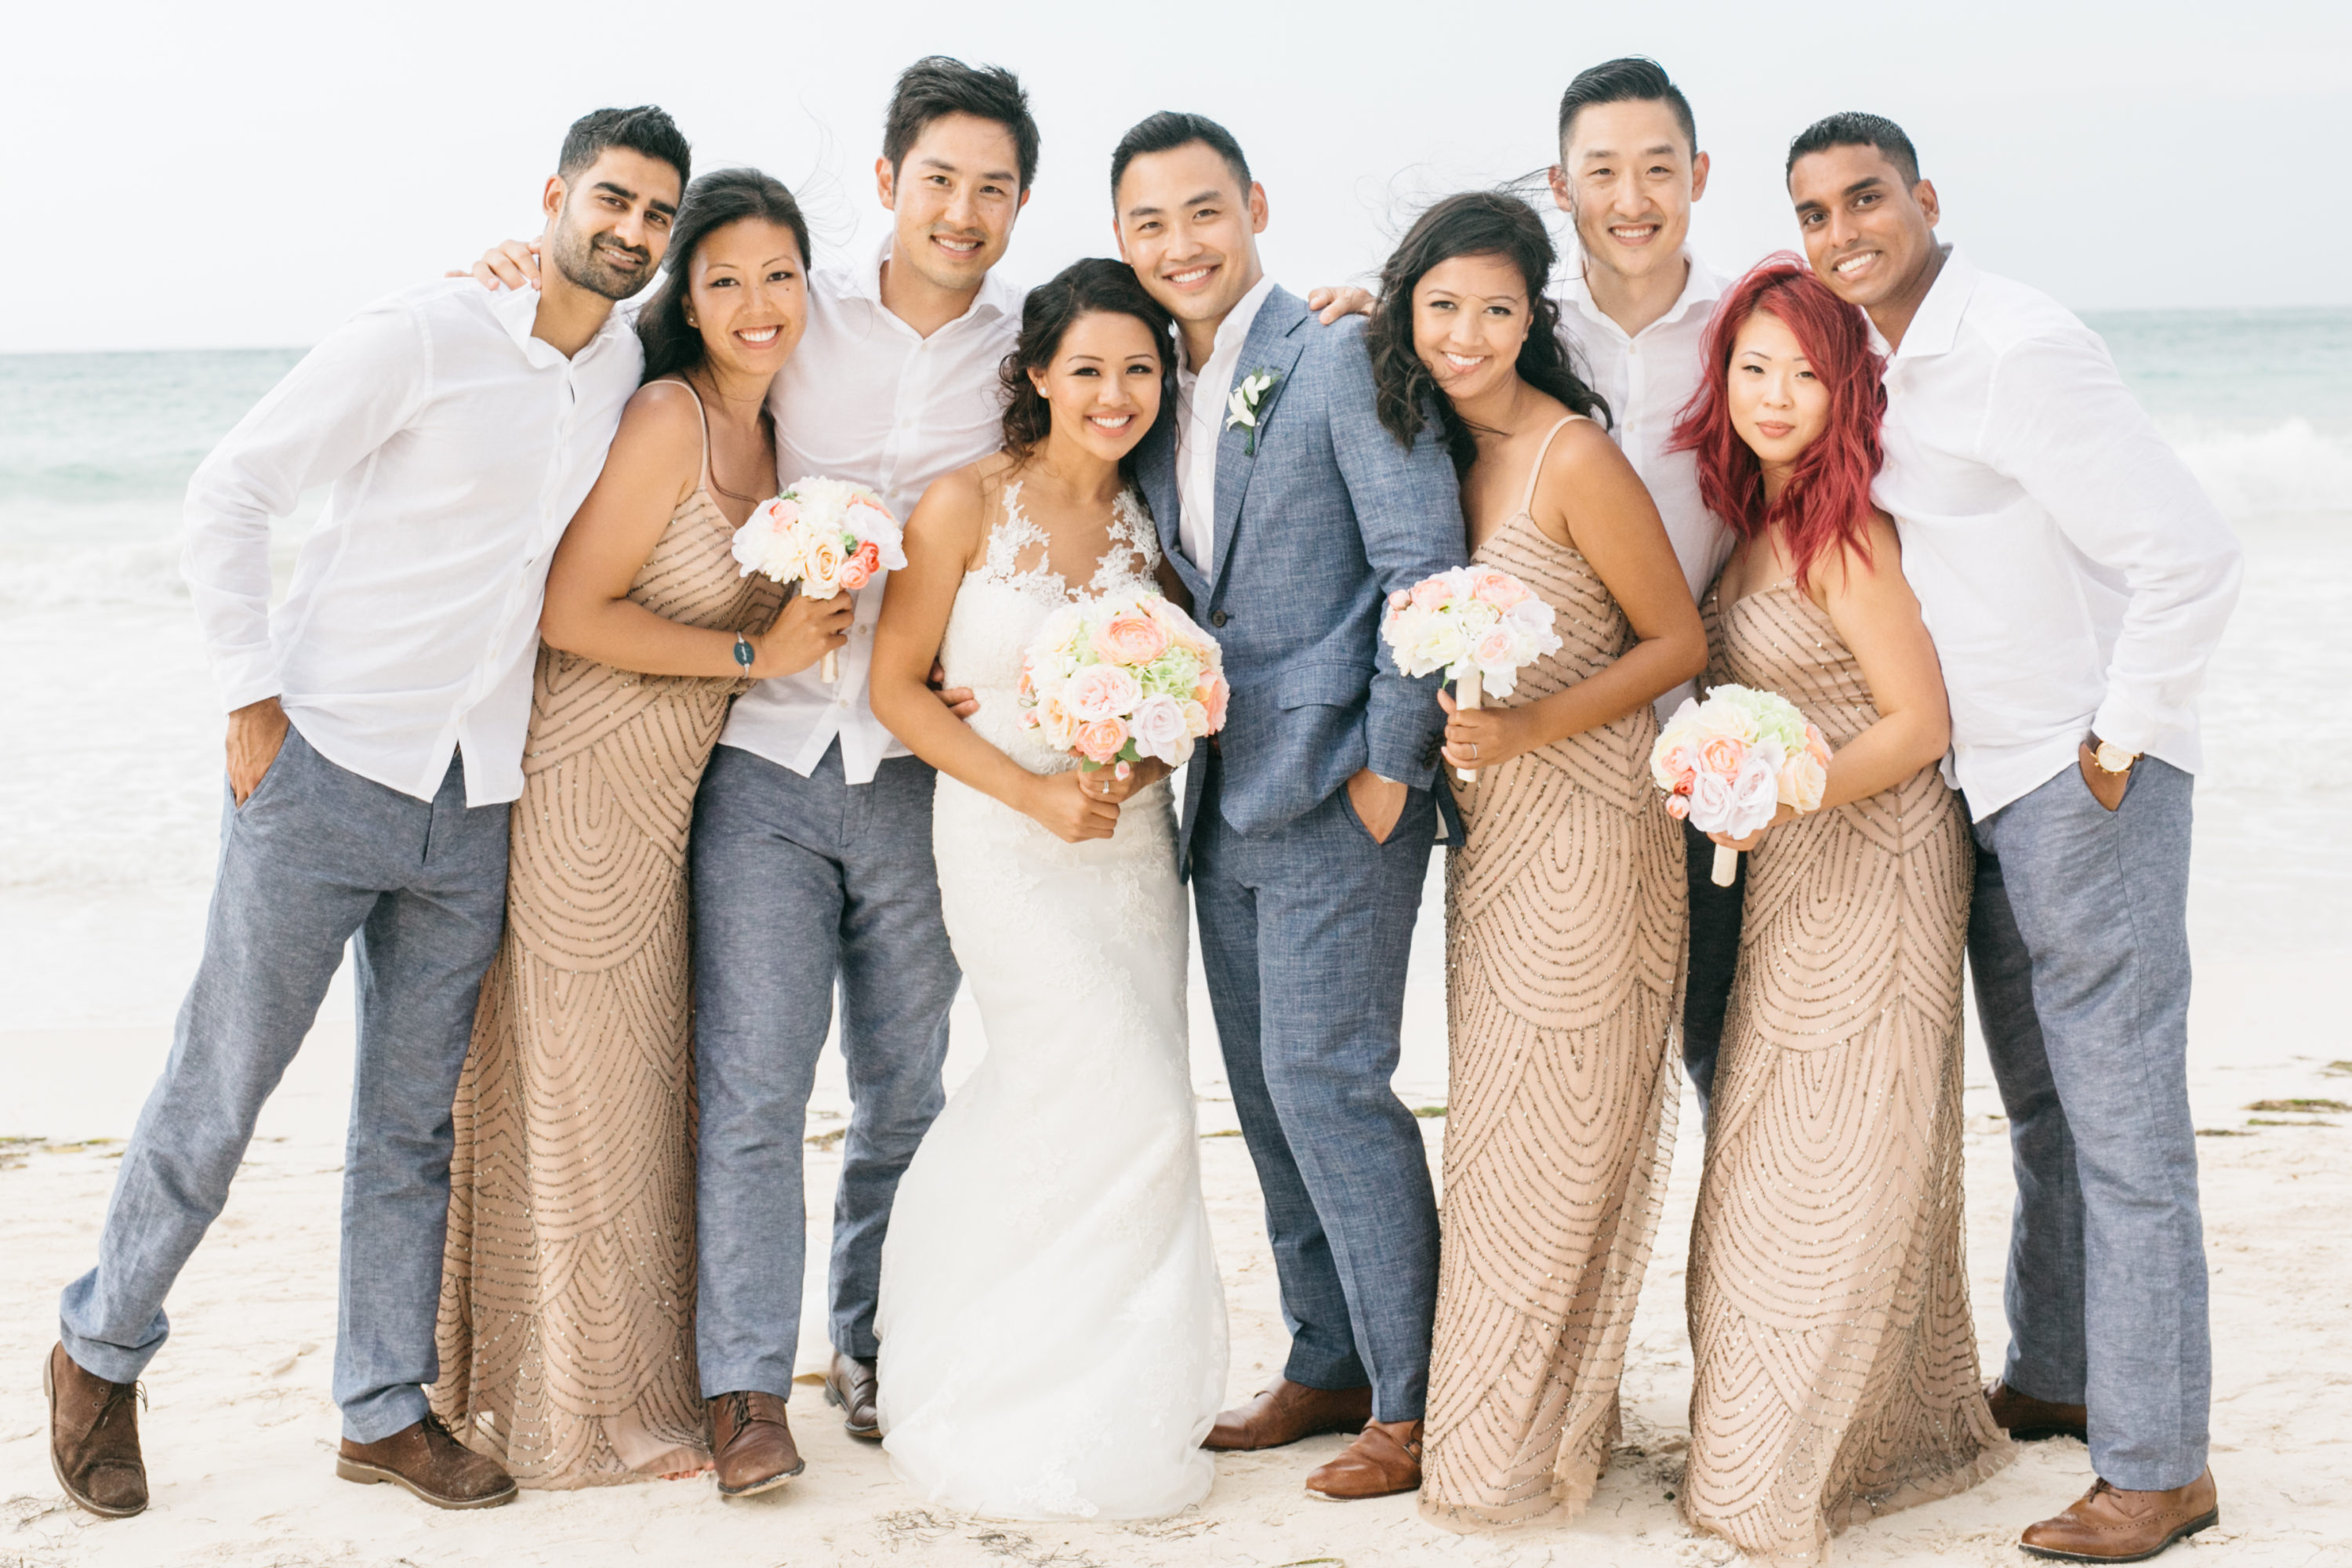 Bridal party portrait at the beach